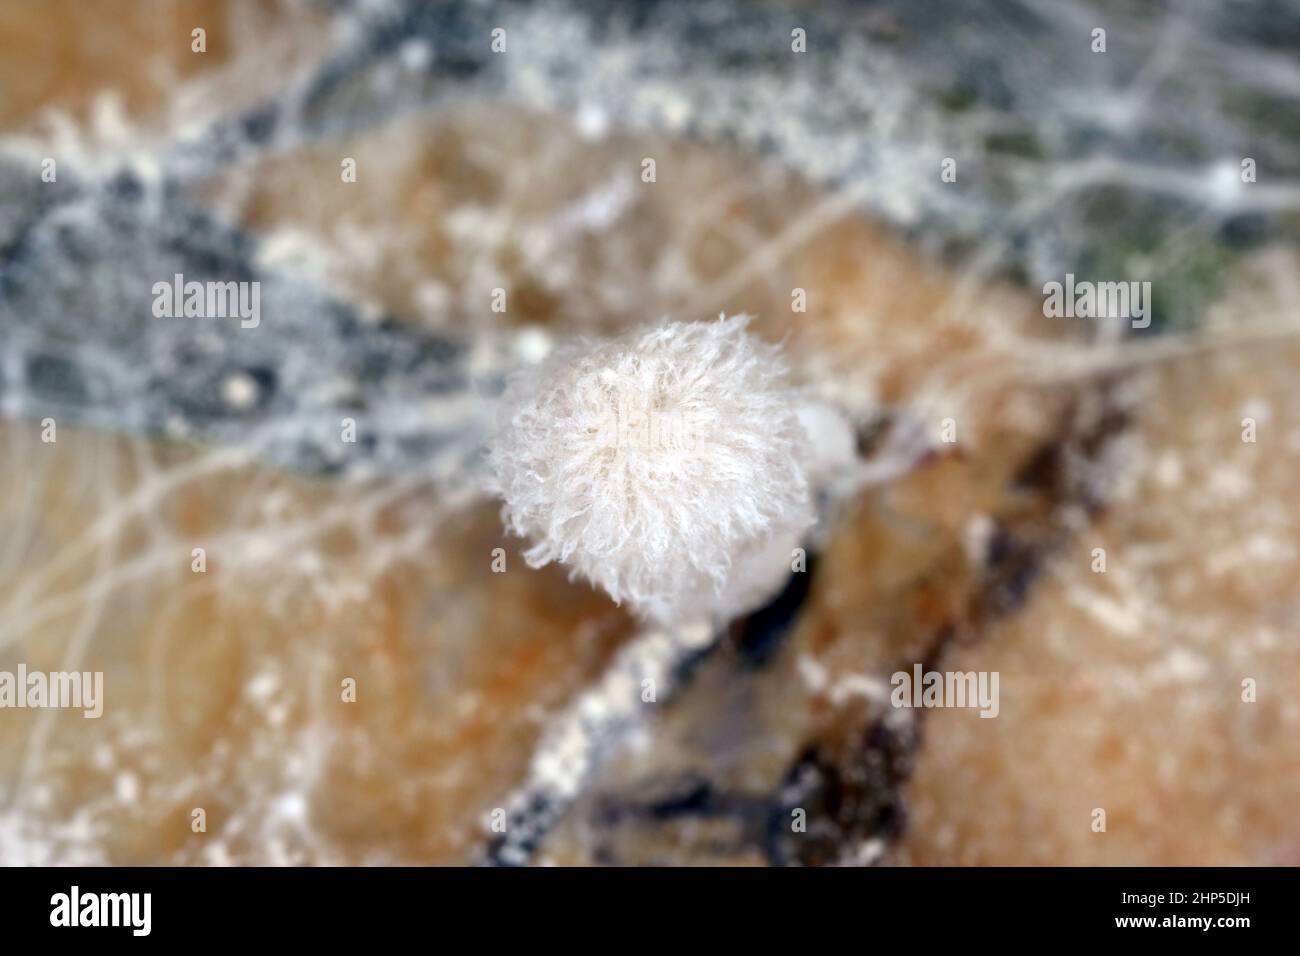 Mycelium and young fruiting bodies of mushrooms of the genus Coprinus - shaggy ink cap. Stock Photo